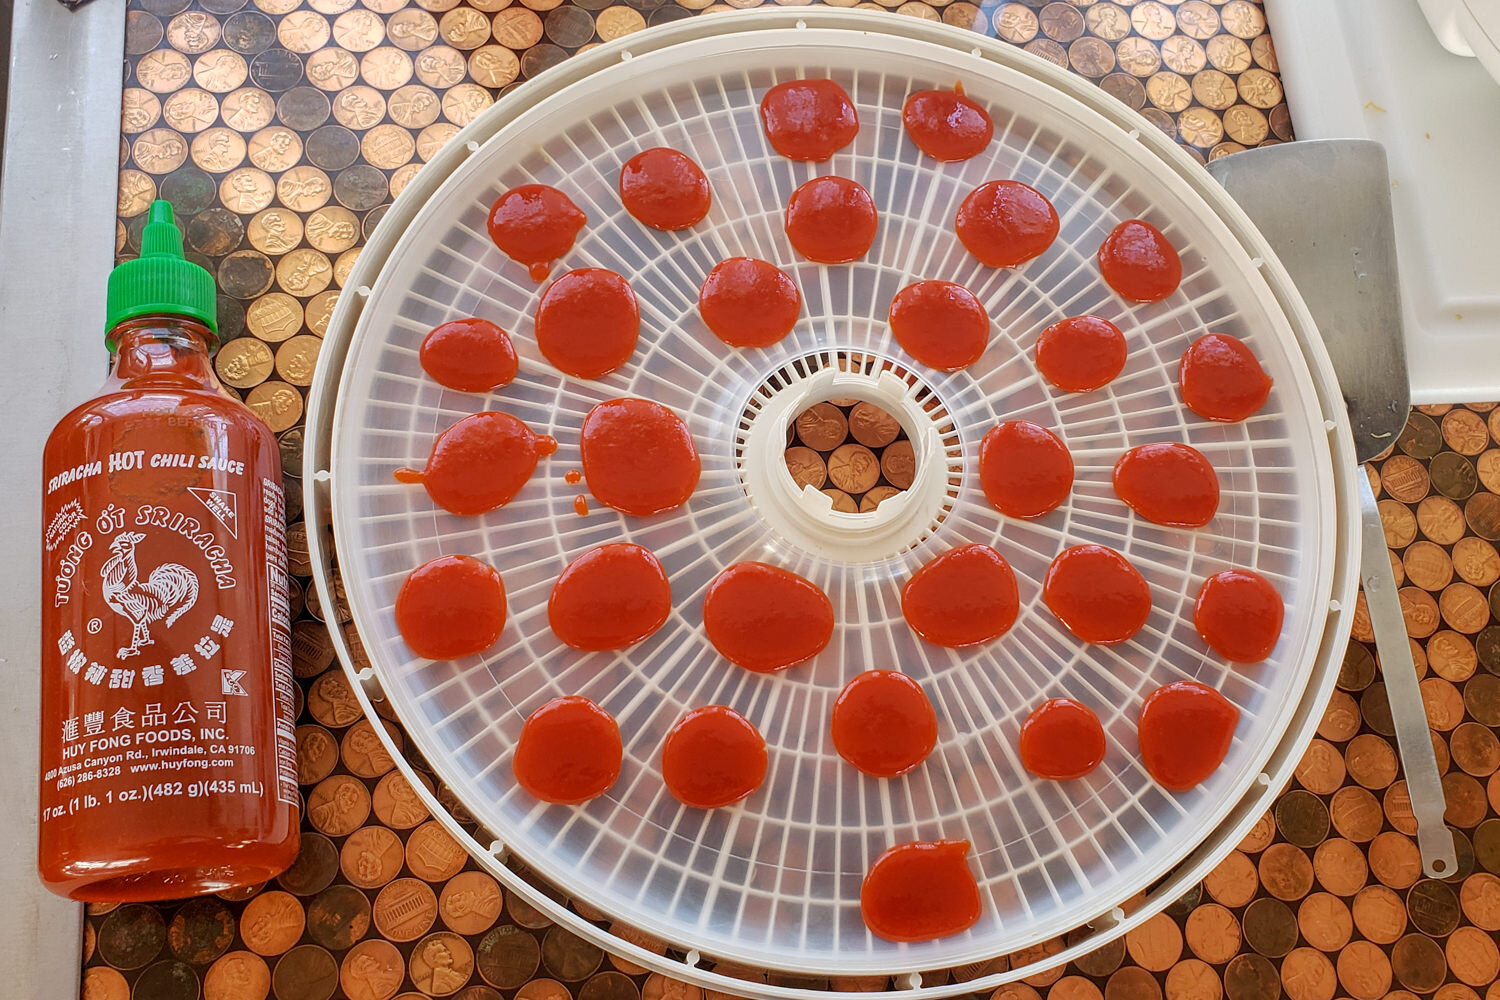 dehydrate sriracha coins to add spice to any meal.